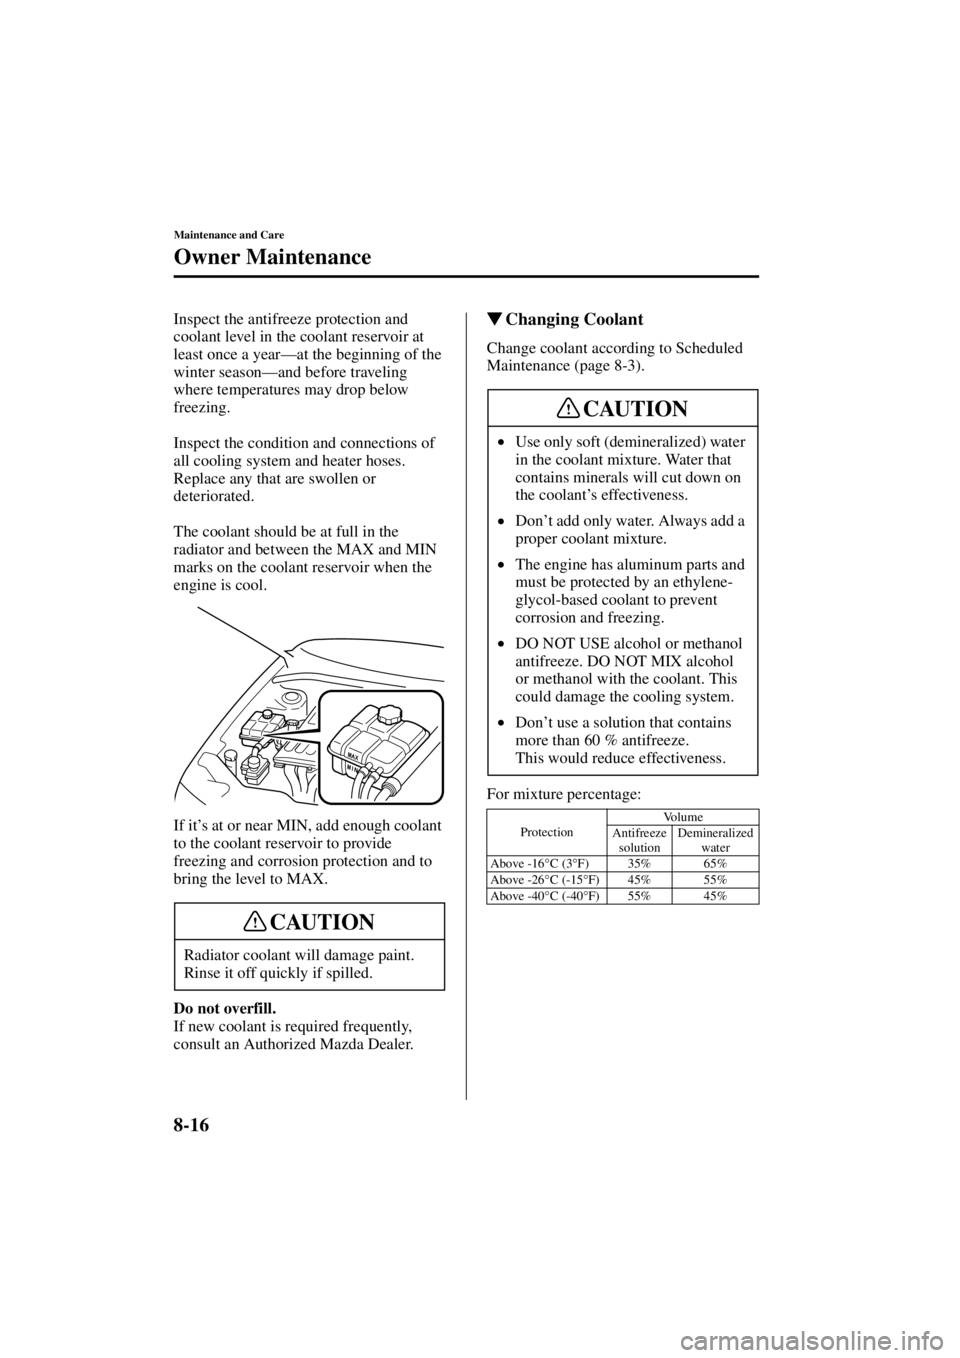 MAZDA MODEL 3 4-DOOR 2004  Owners Manual 8-16
Maintenance and Care
Owner Maintenance
Form No. 8S18-EA-03I
Inspect the antifreeze protection and 
coolant level in the coolant reservoir at 
least once a year—at the beginning of the 
winter s